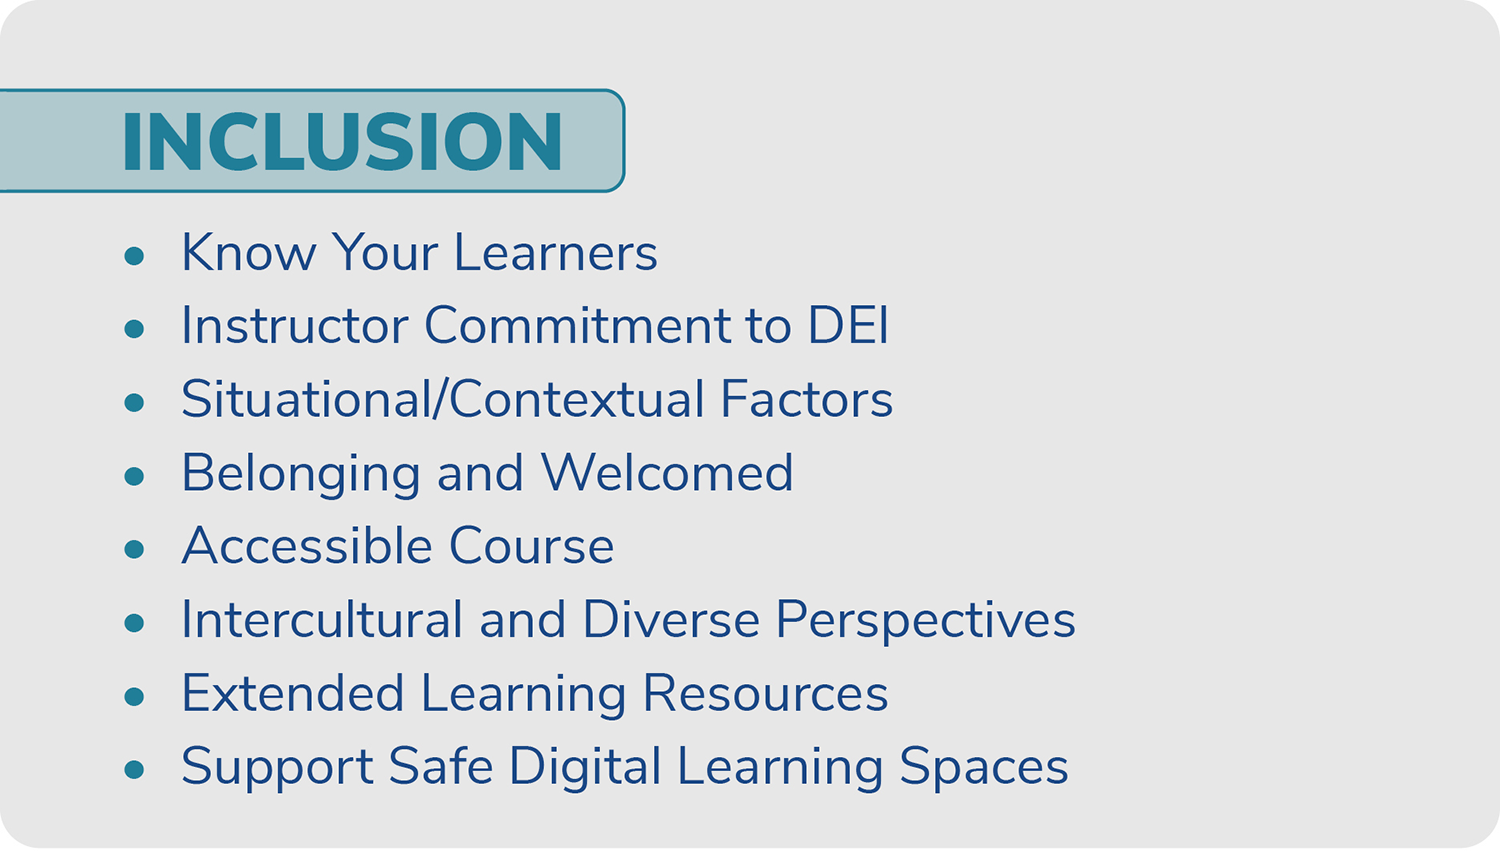 A bulleted list of the eight elements of the 'Inclusion' dimension of the IDEAS Framework: Know Your Learners; Instructor Commitment to DEI; Situational/Contextual Factors; Belonging and Welcomed; Accessible Course; Intercultural and Diverse Perspectives; Extended Learning Resources; and Support Safe Digital Learning Spaces.